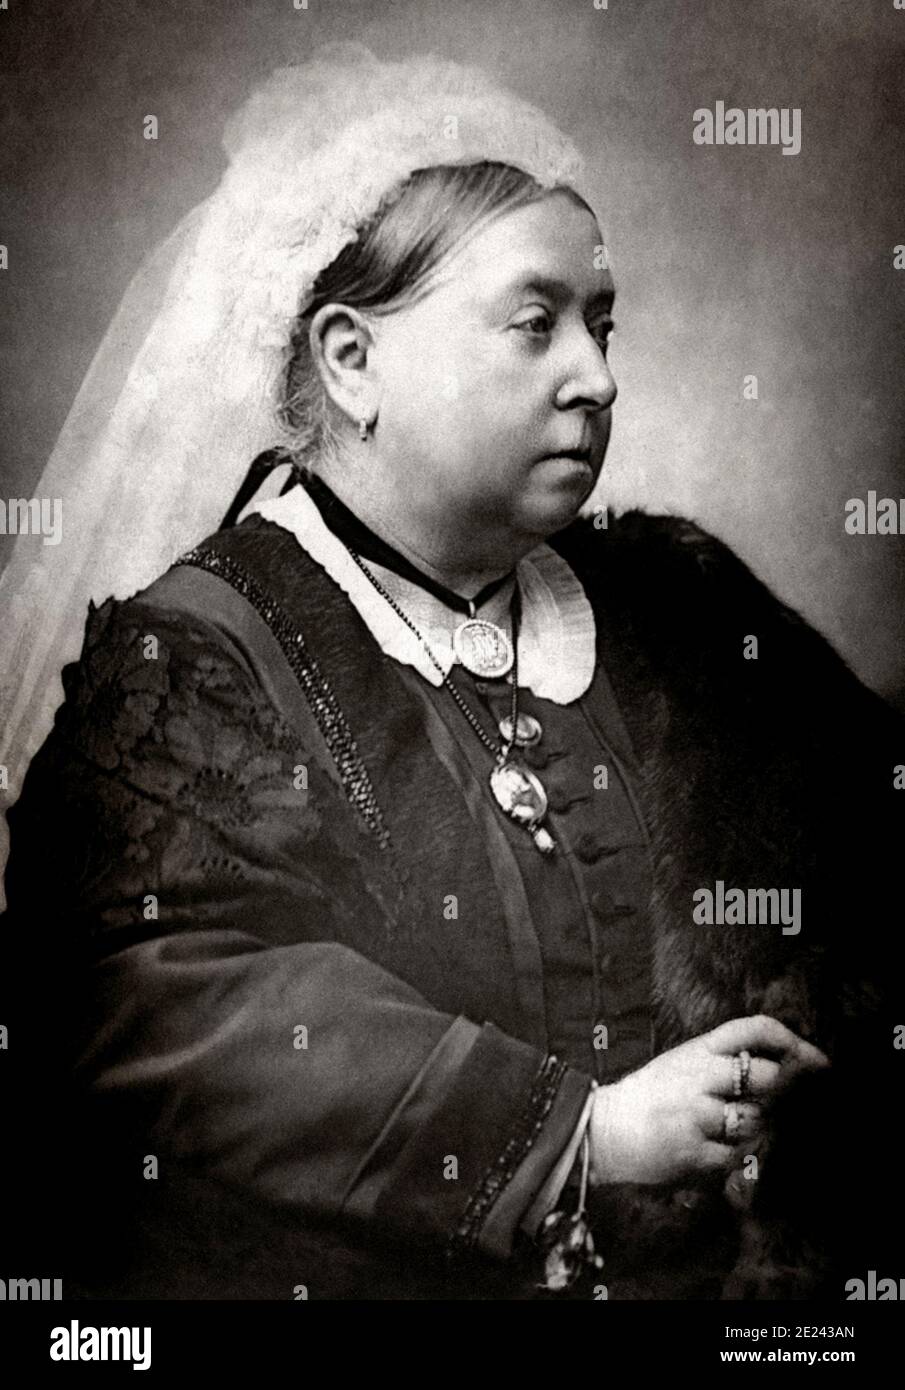 Victoria (1819 – 1901) was Queen of the United Kingdom of Great Britain and Ireland from 20 June 1837 until her death. Known as the Victorian era, her Stock Photo